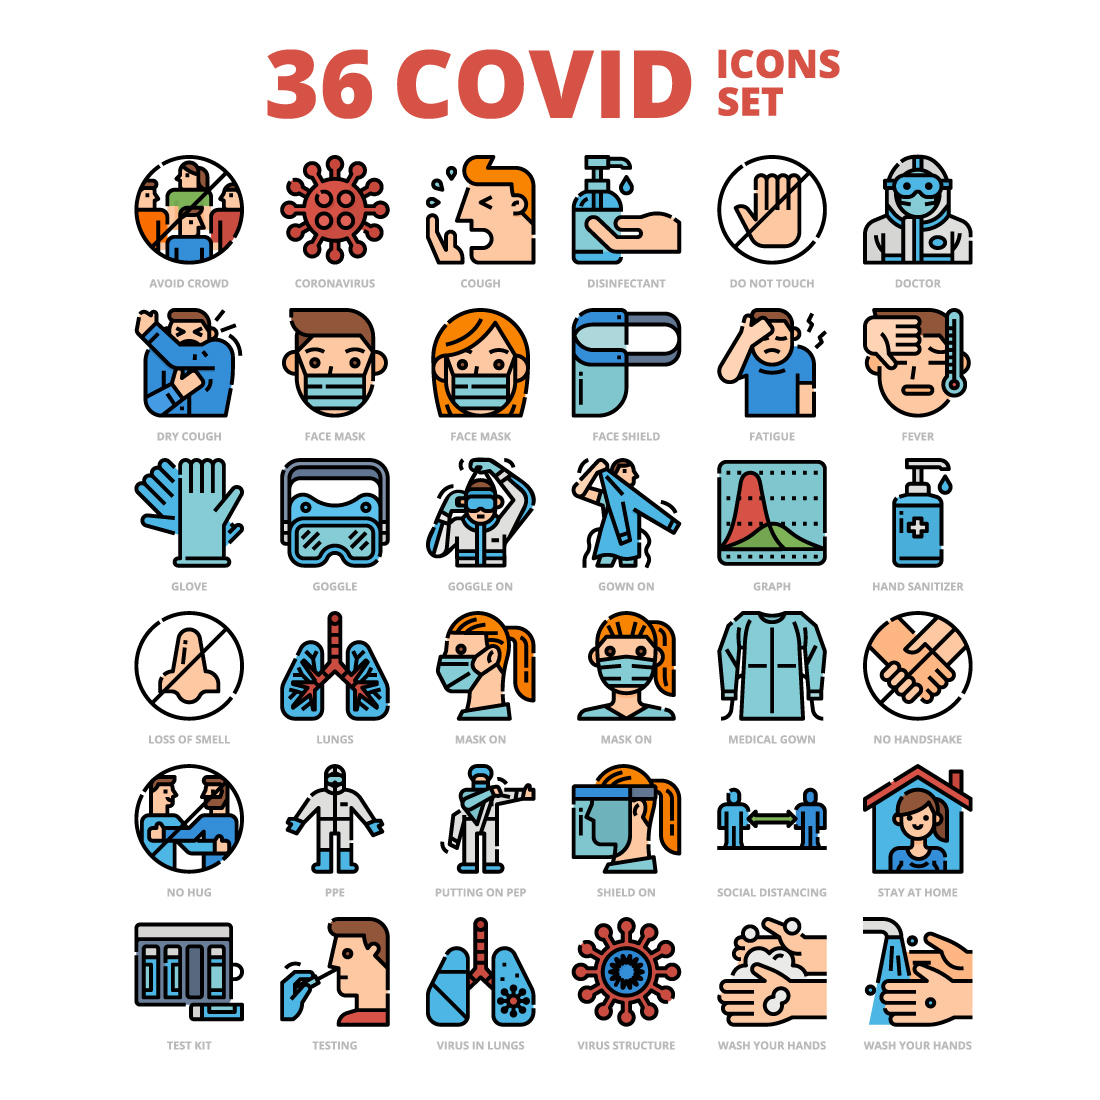 36 Covid Icons Set x 4 Styles cover image.